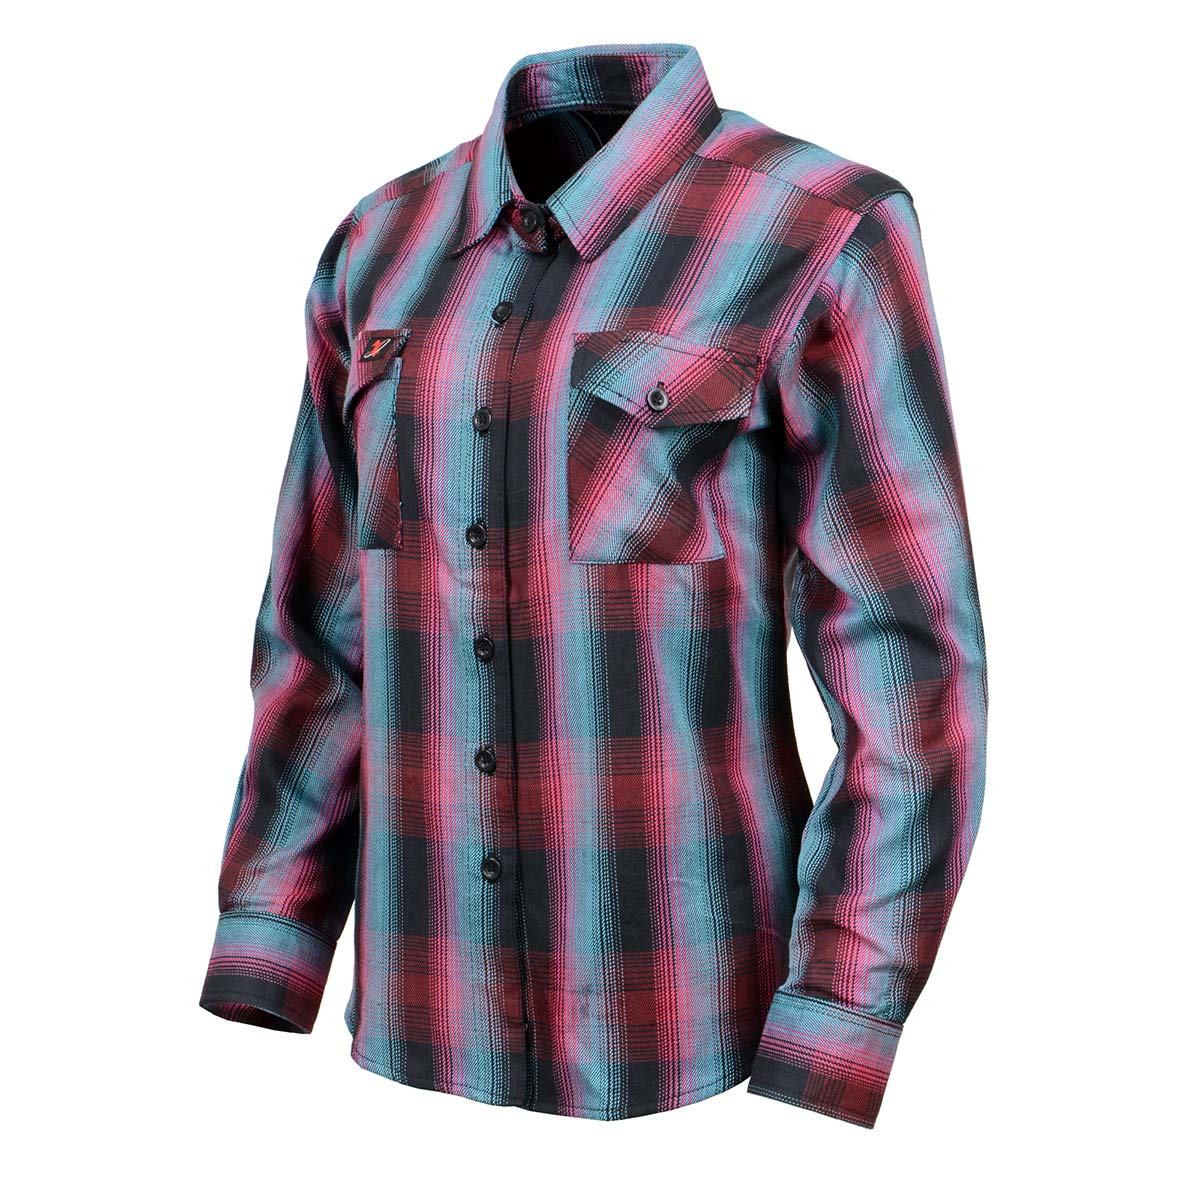 Women's Black and Pink with Blue Long Sleeve Cotton Flannel Shirt